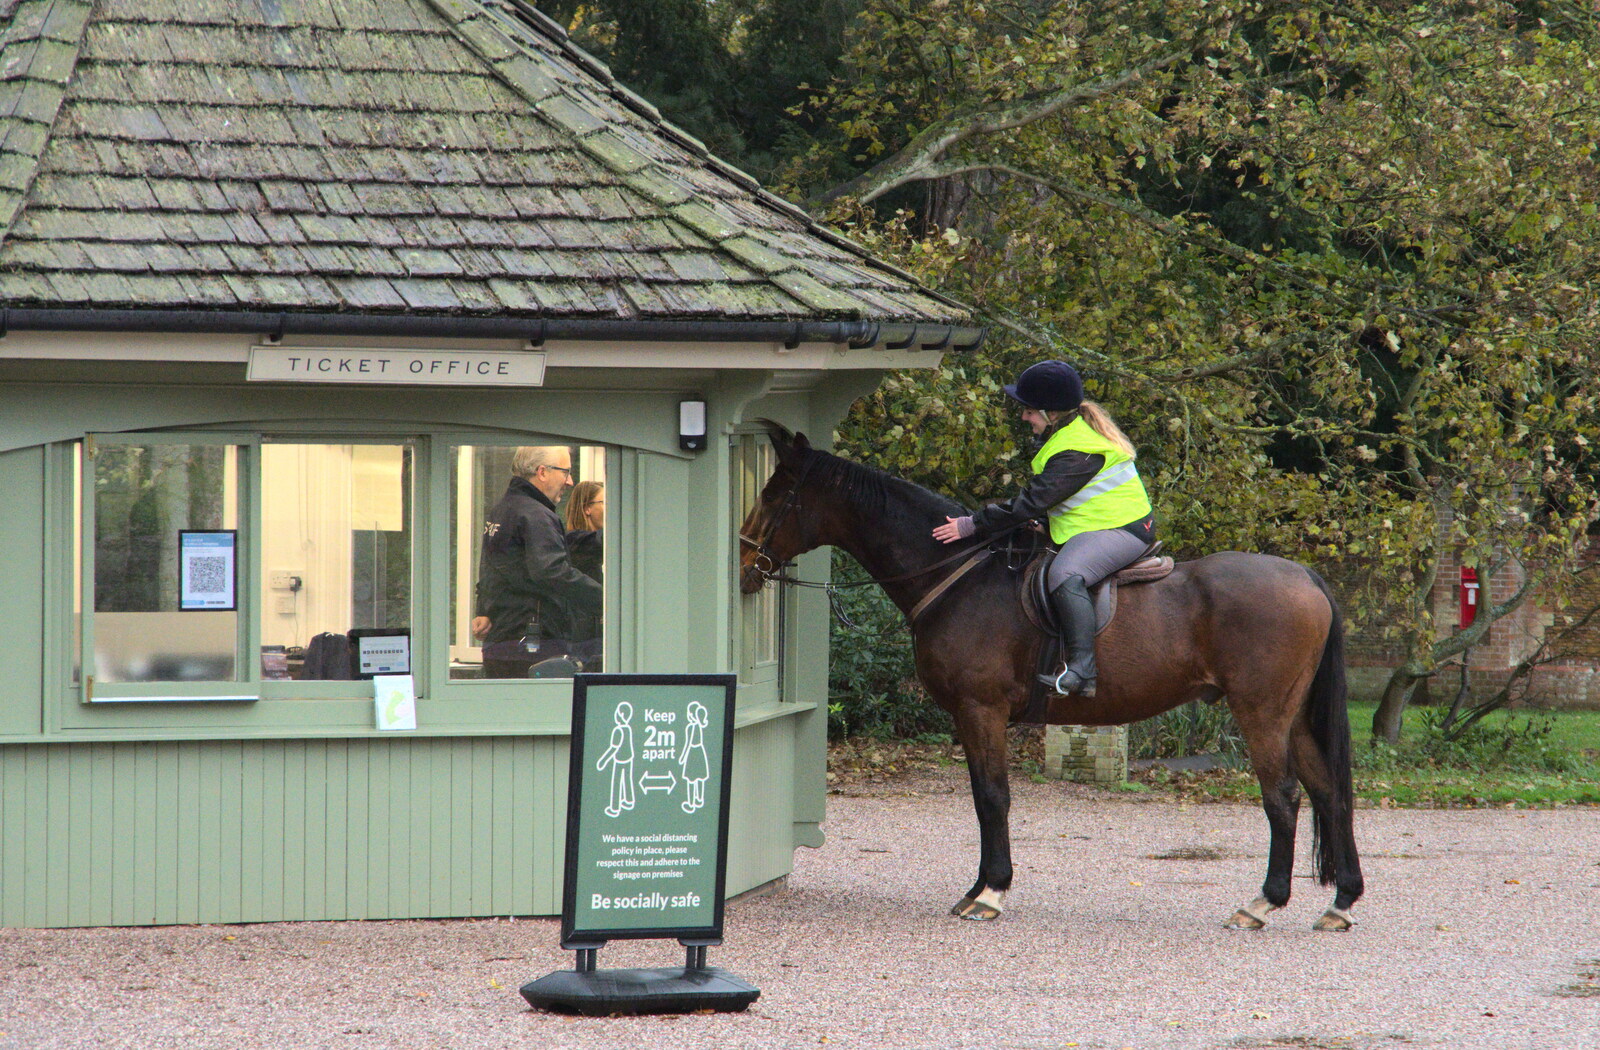 A horse buys some tickets from A Trip to Sandringham Estate, Norfolk - 31st October 2020